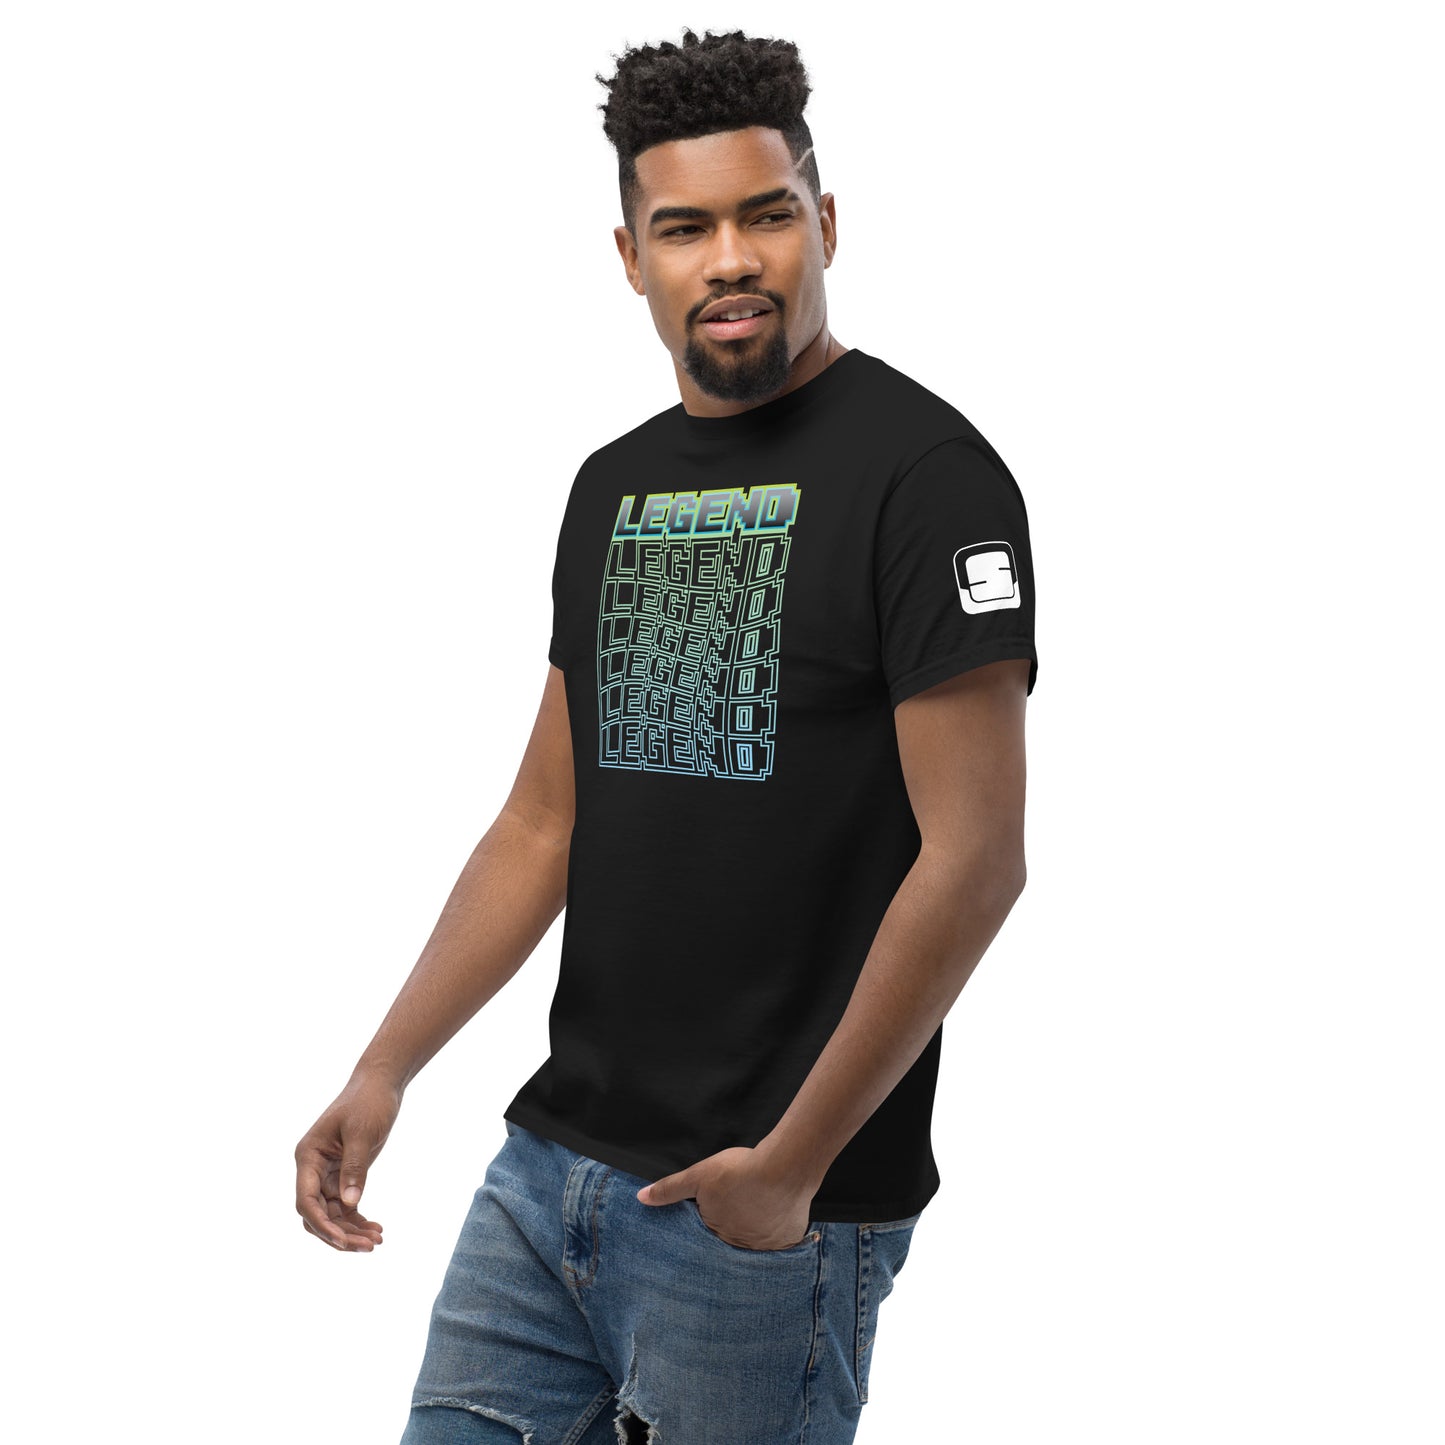 Confident man with a slight smile wearing a black t-shirt featuring a vibrant 'LEGEND' graphic in a green-to-blue gradient cube illusion, with a logo patch on the sleeve, paired with blue jeans, against a white background.